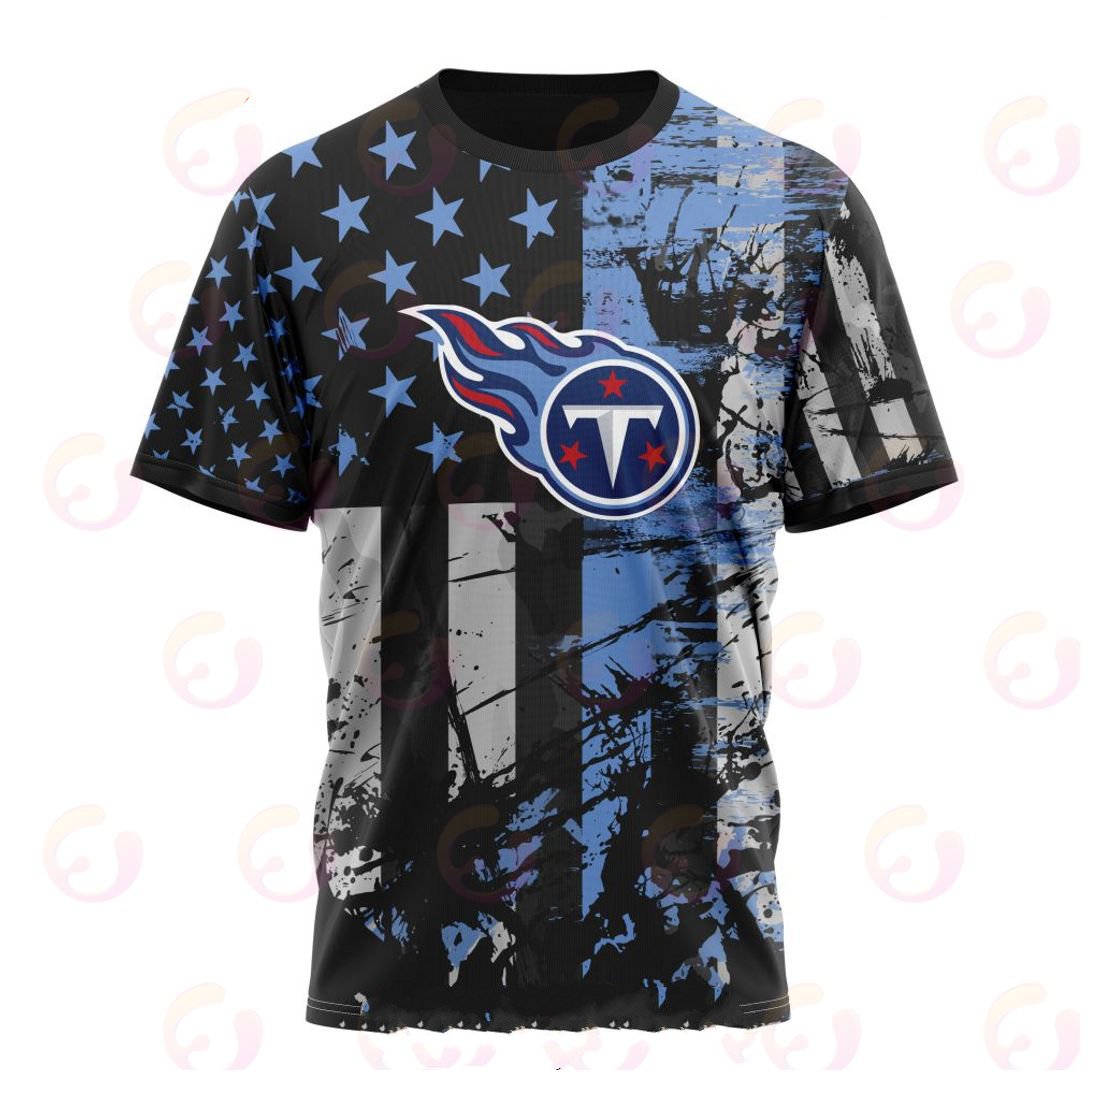 TENNESSEE TITANS 3D HOODIE JERSEY FOR AMERICA